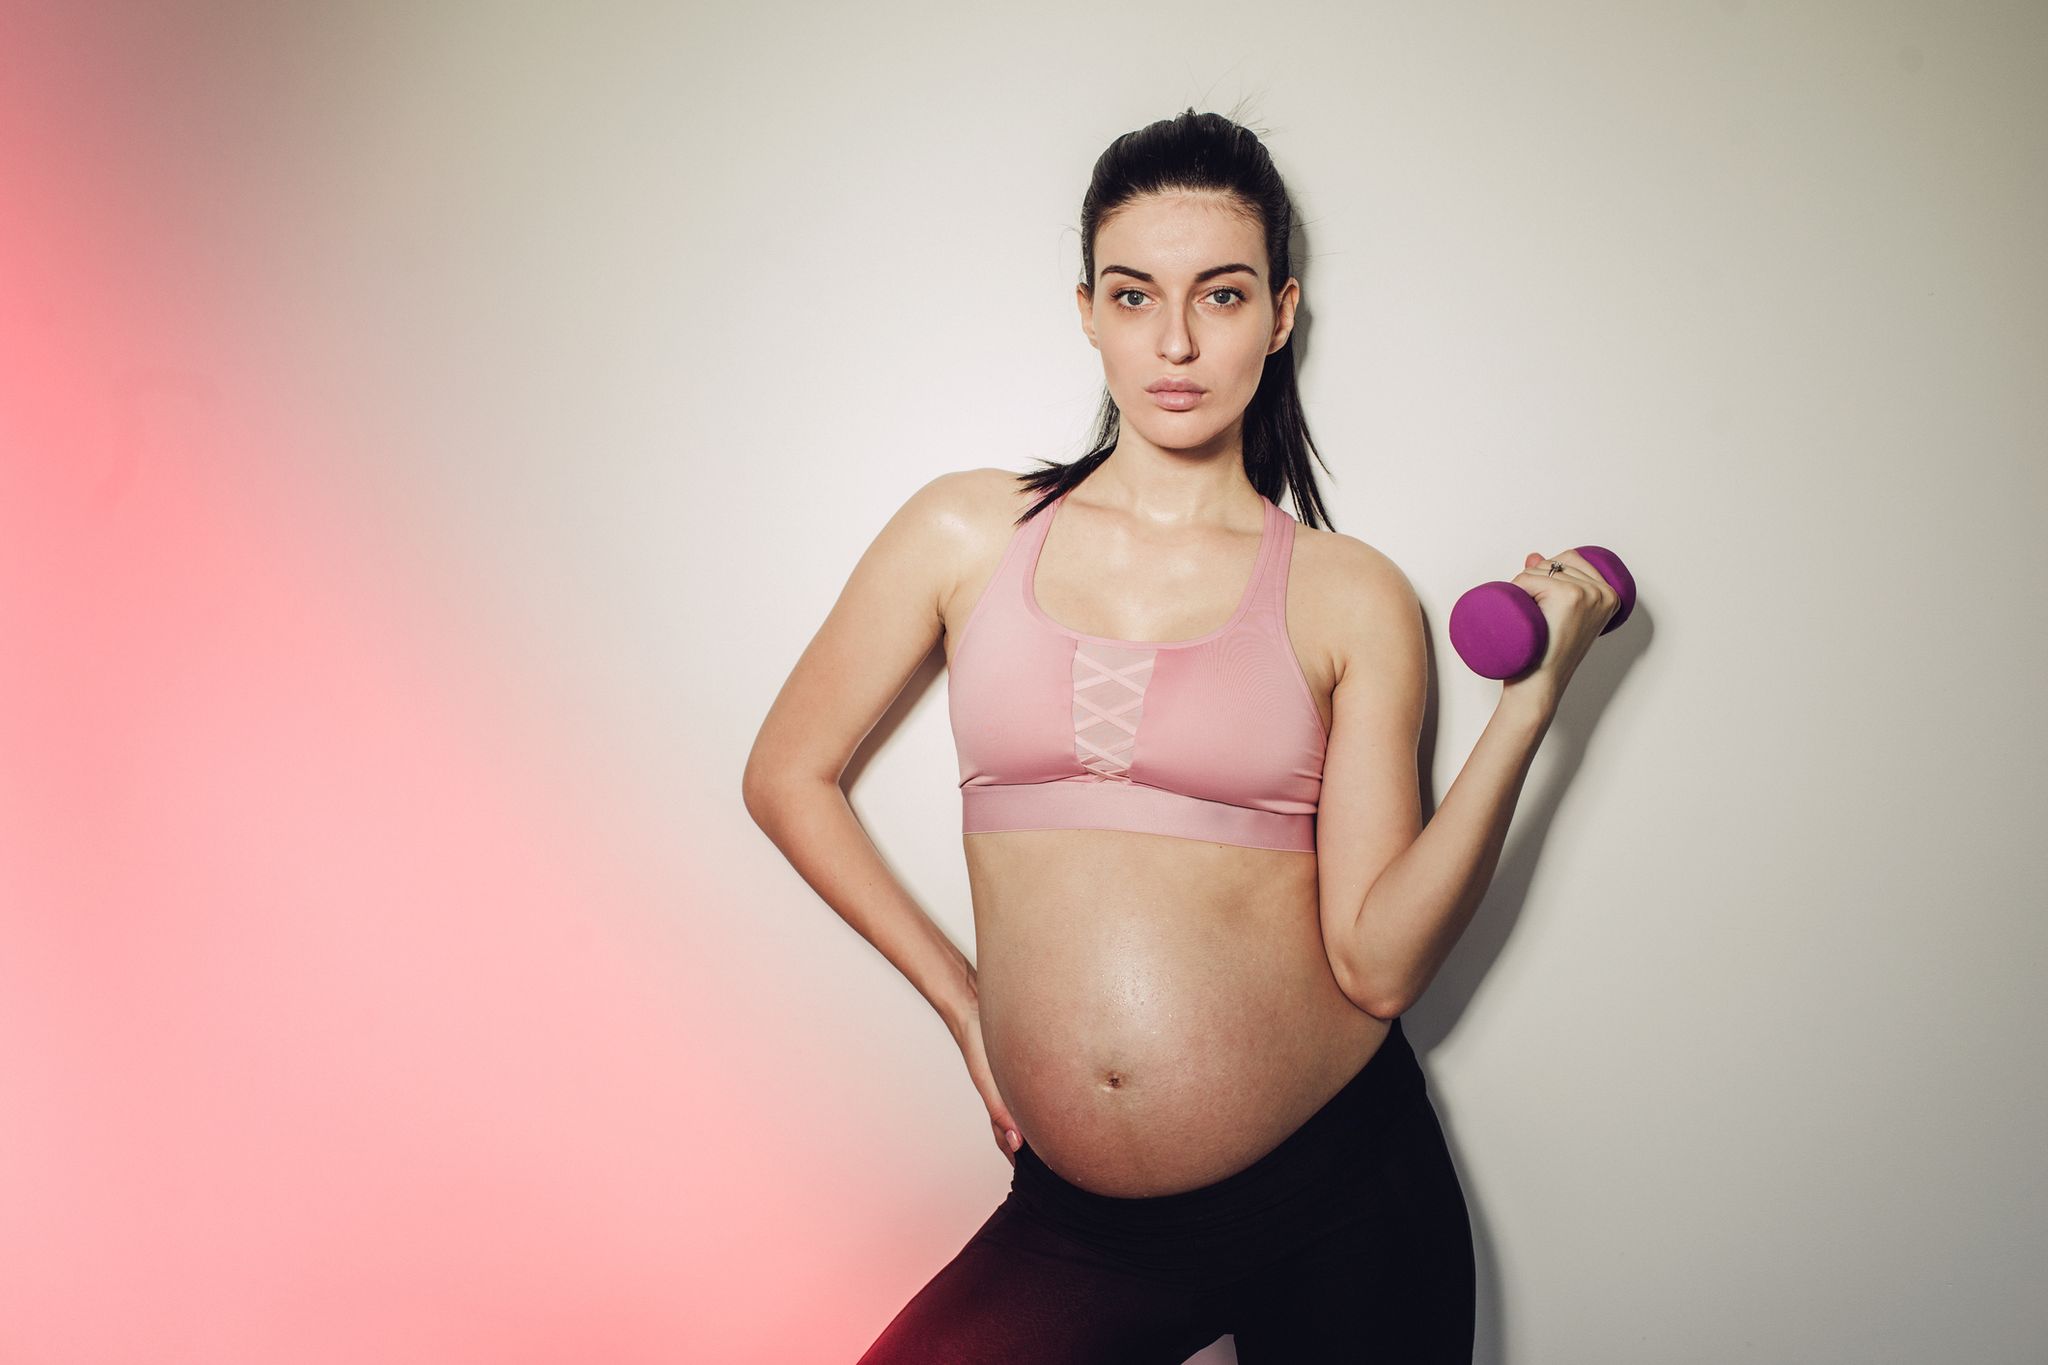 Be Cautious when Stretching During Pregnancy - Overstretching can lead to a  Variety of Injuries